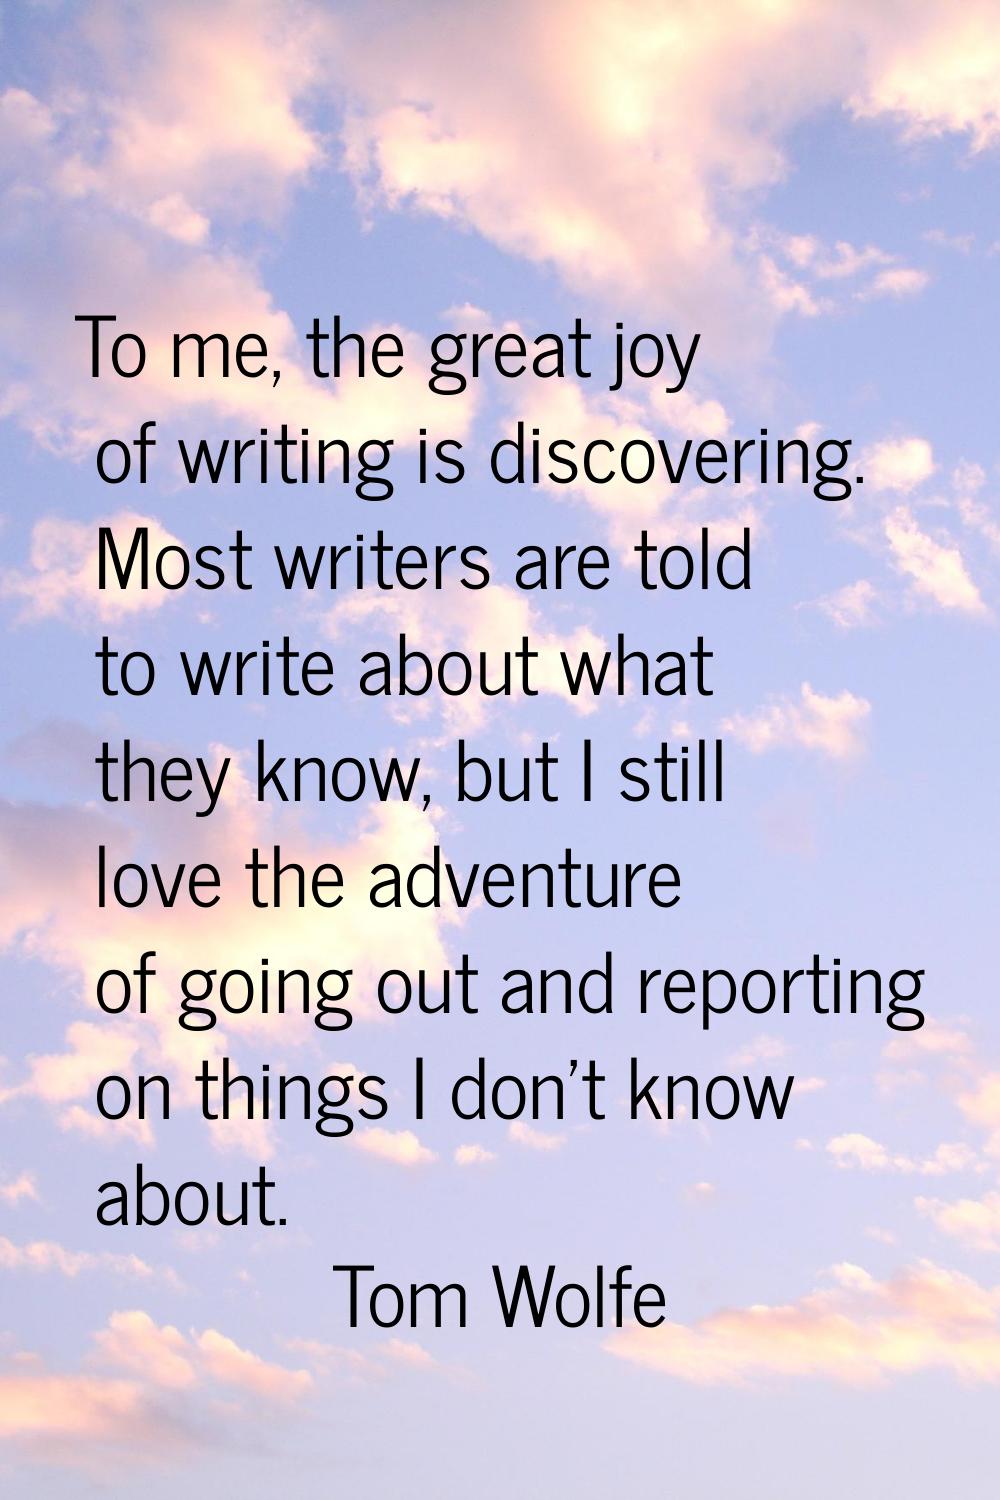 To me, the great joy of writing is discovering. Most writers are told to write about what they know